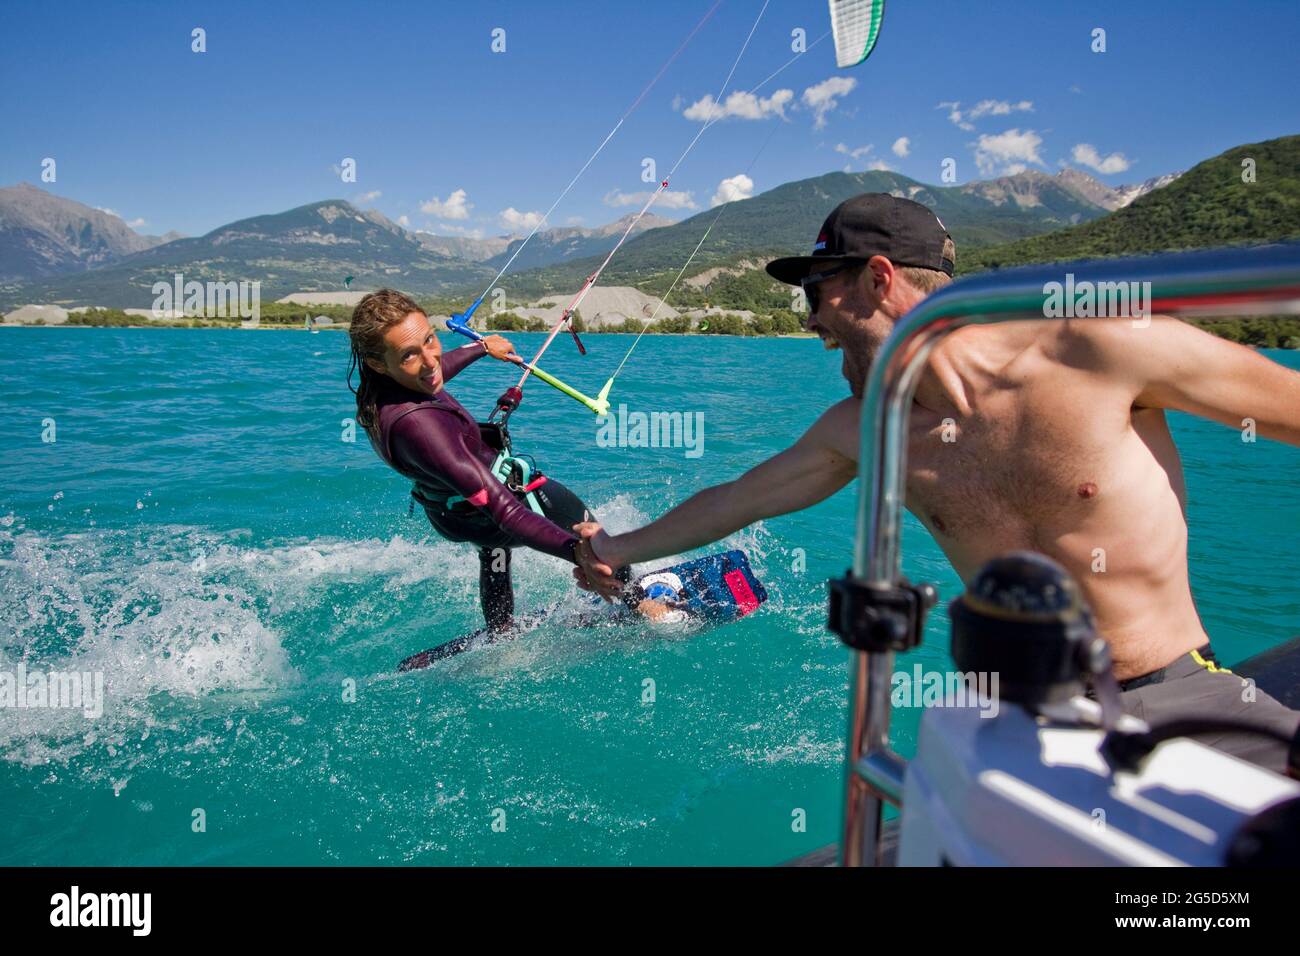 Le Lac, France. 26th June, 2021. A woman kitesurfing on Lac de Serre-Poncon here she claps the hand of a man who pilots a boat, Savine le Lac, Hautes Alpes, France on June 25, 2021. Photo by Durand Thibaut / ABACAPRESS.COM Credit: Abaca Press/Alamy Live News Stock Photo